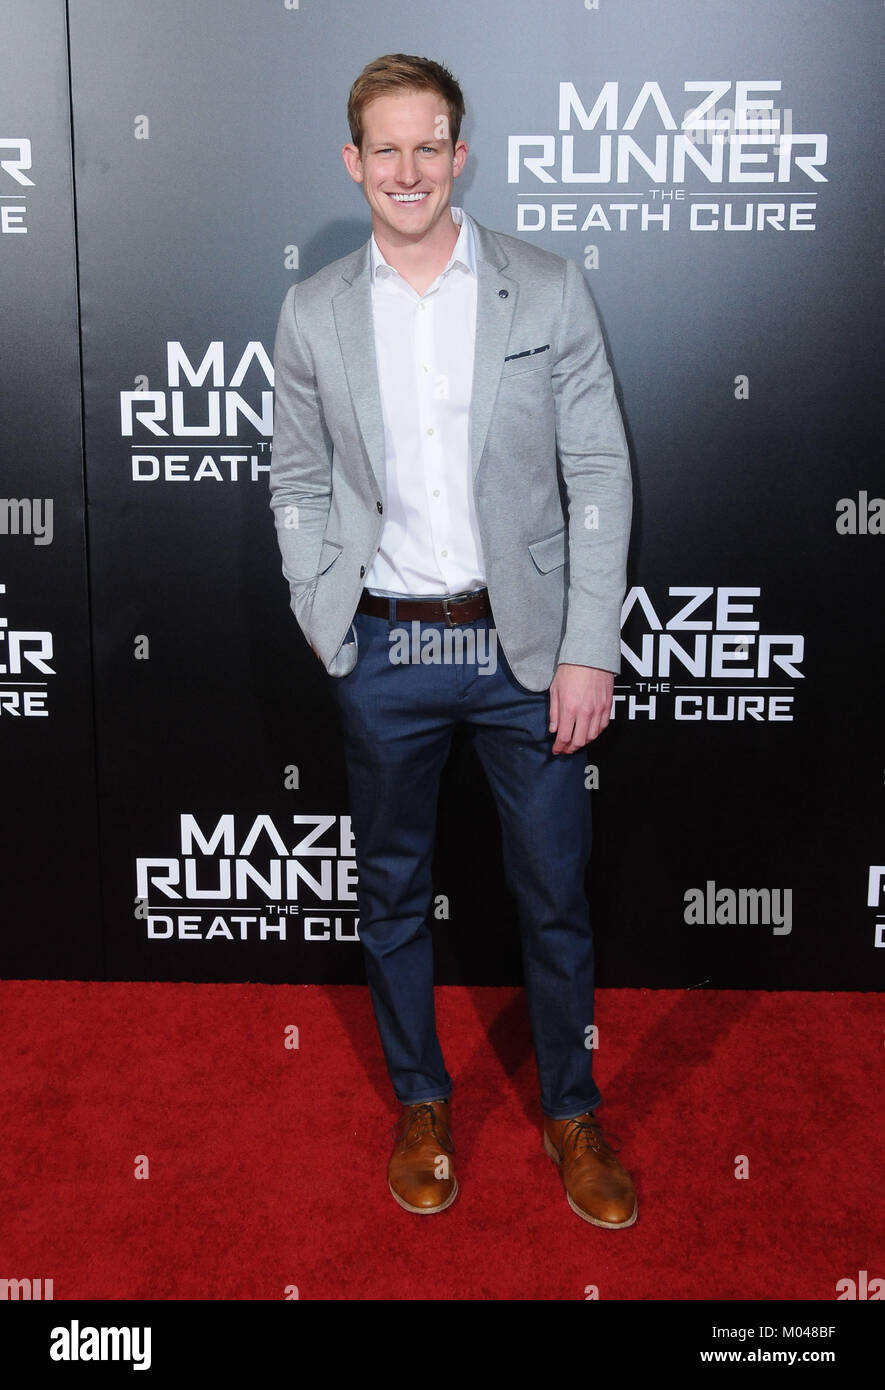 Los Angeles, USA. 18th Jan, 2018. Actor Chris Sheffield attends 20th Century Fox Red Carpet Fan Screening of 'Maze Runner: The Death Cure' at AMC Century City 15 - Westfield Centur City Mall on January 18, 2018 in Los Angeles, California. Credit: Barry King/Alamy Live News Stock Photo